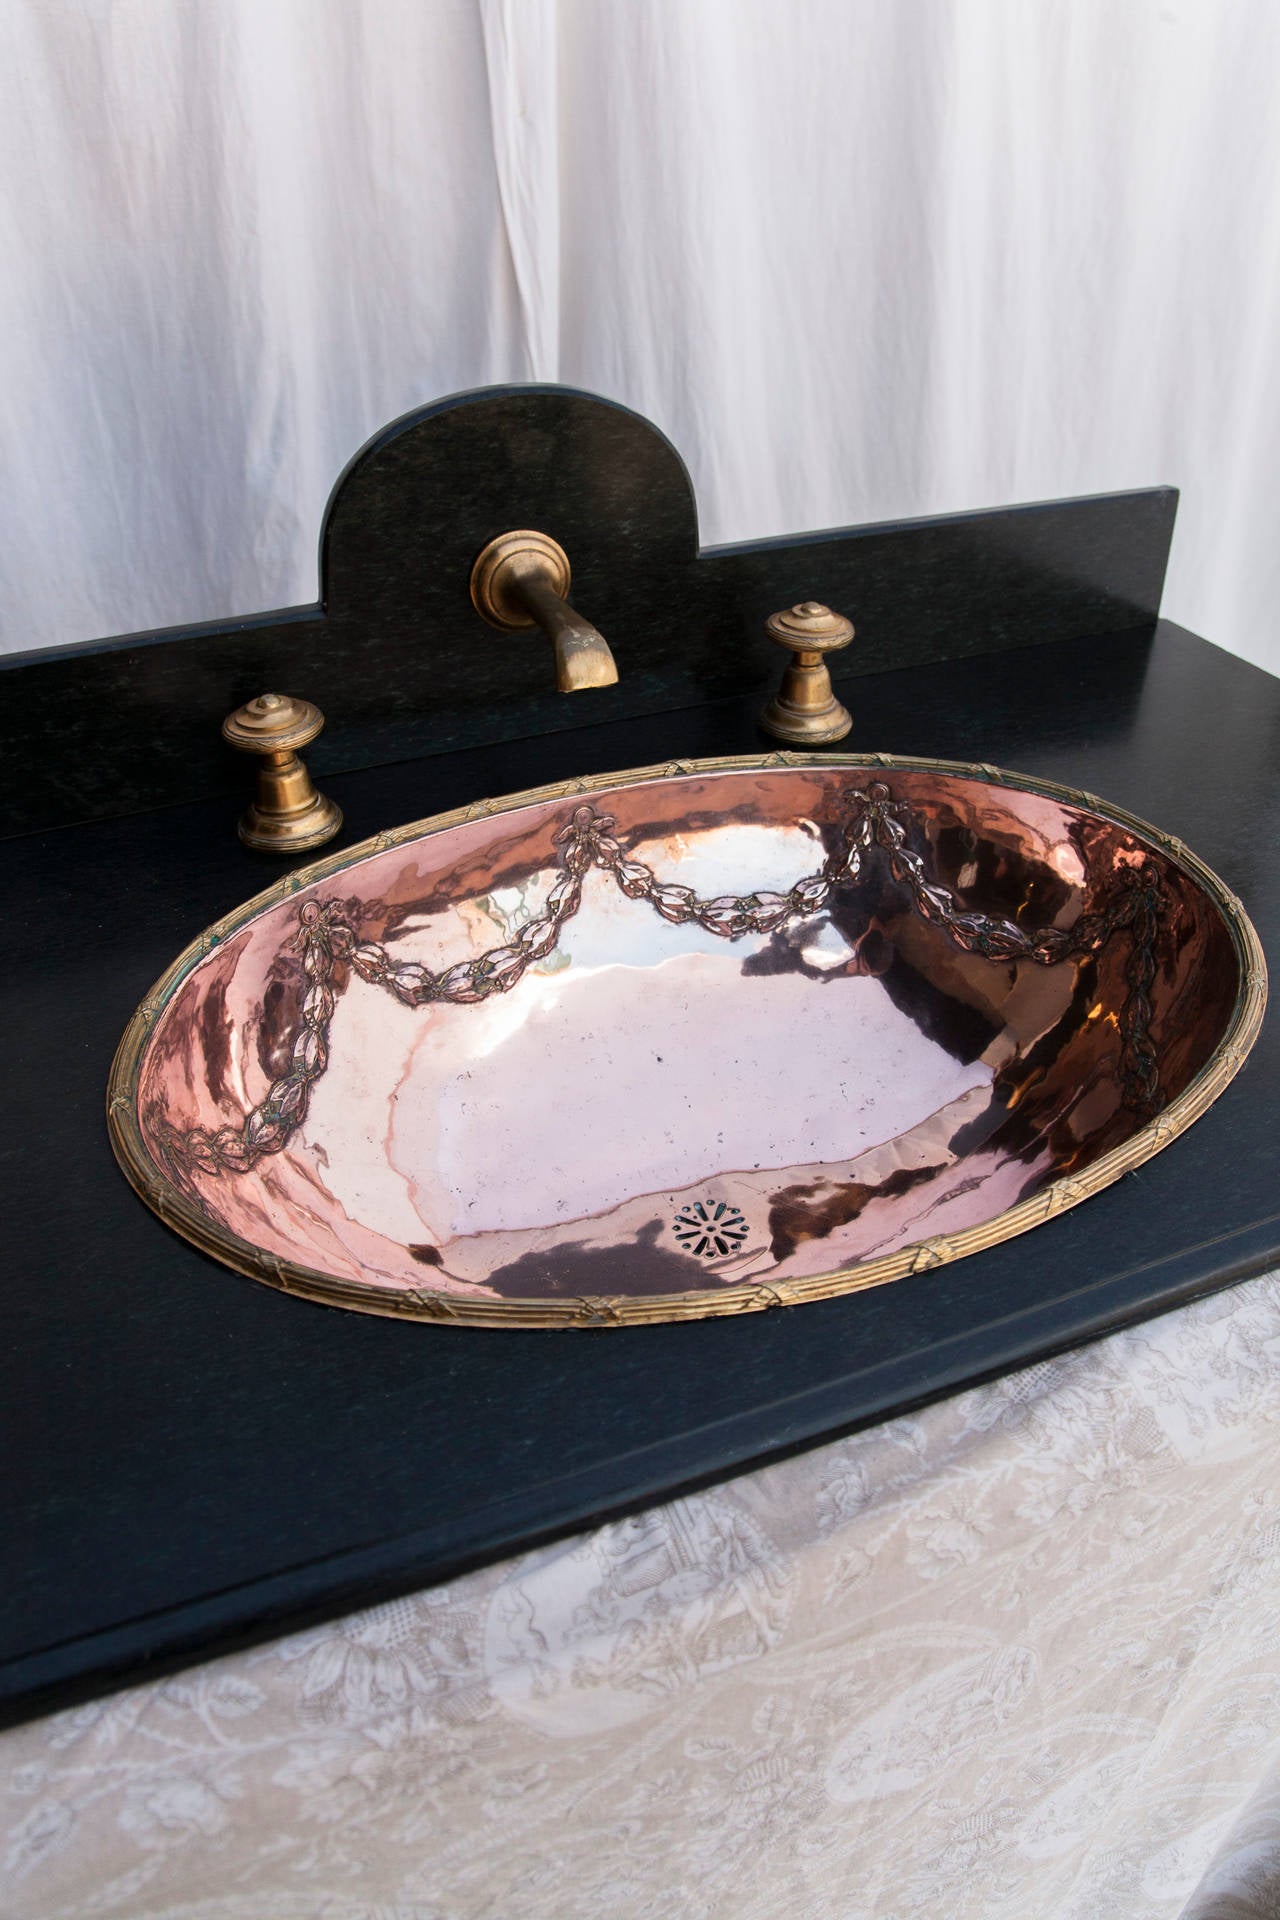 This exquisite one-of-a-kind Louis XVI style copper and brass sink features its original bronze faucet and handles. The sink and bronze handles have a matching Louis XVI festooned garland and ribbon motif. Mounted in its custom black marble counter